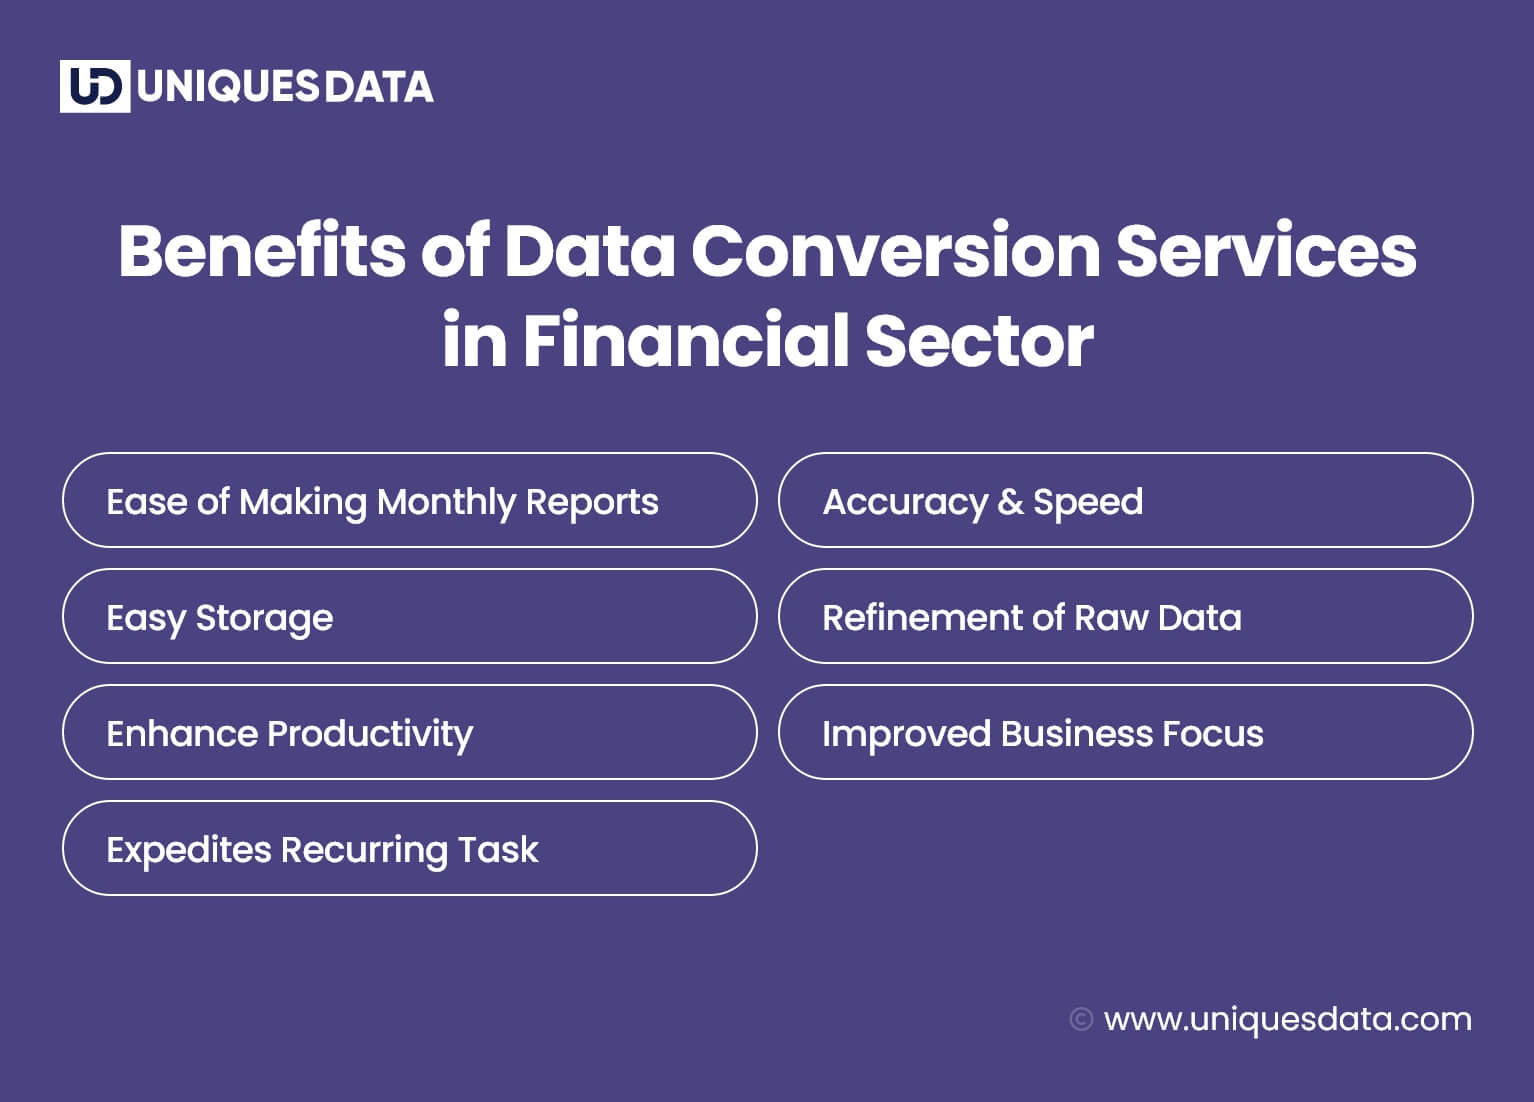 Benefits of Data Conversion Services in Financial Sector